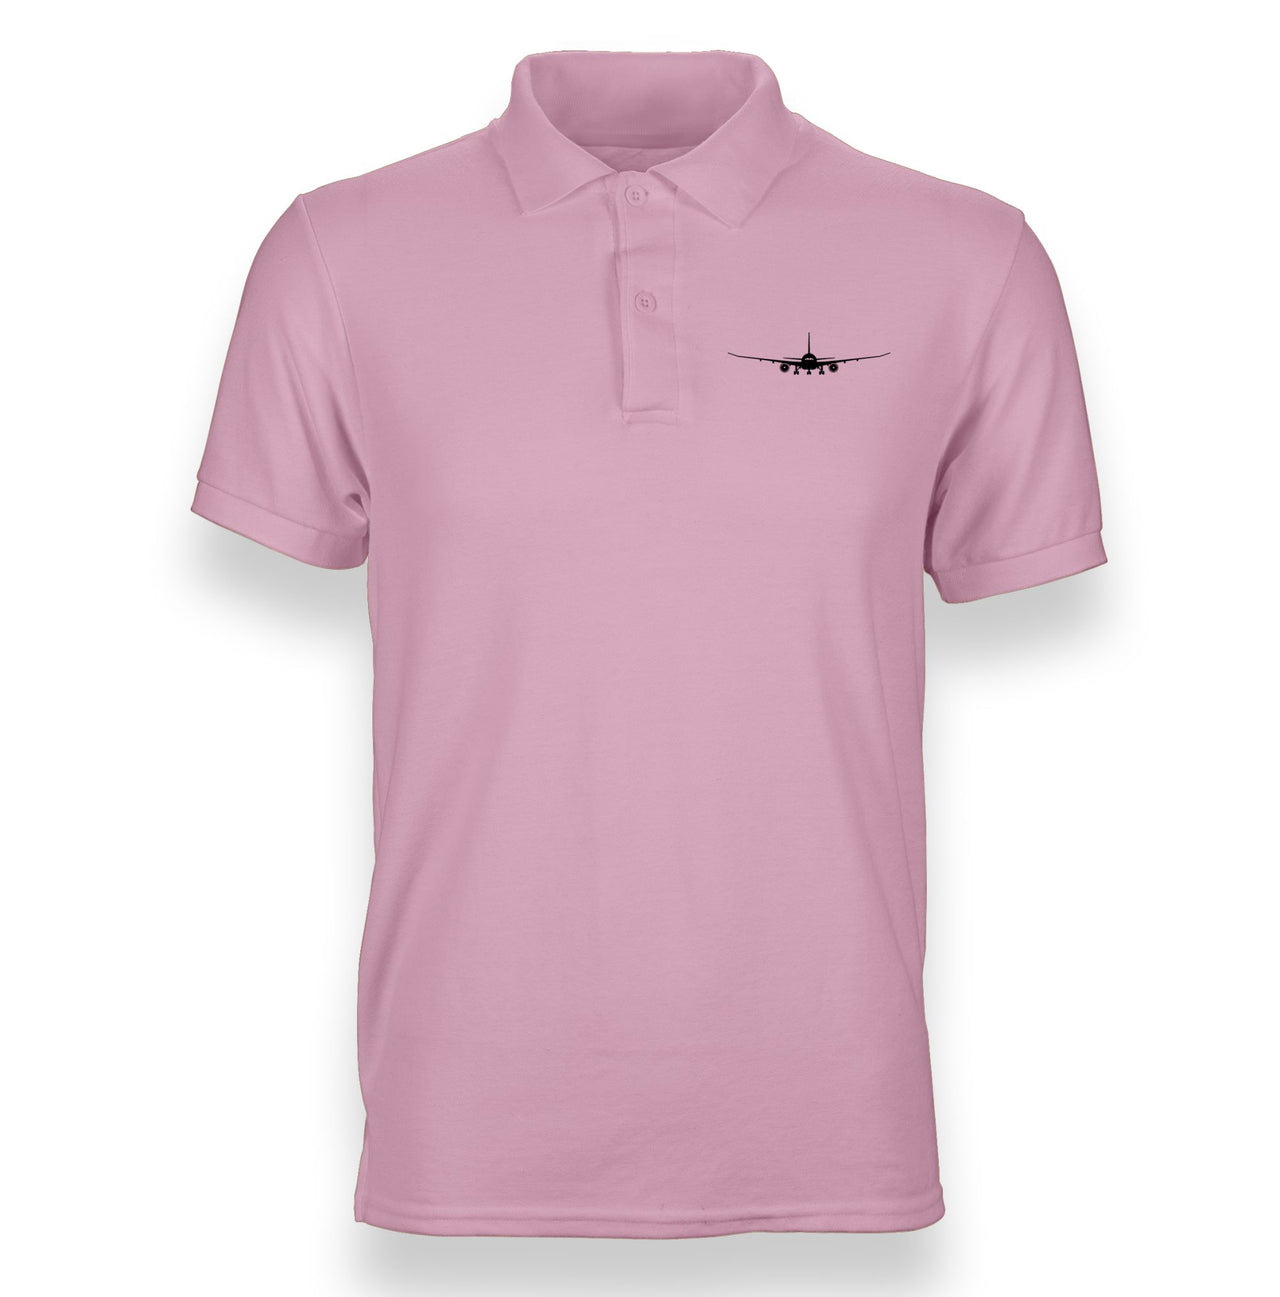 Boeing 787 Silhouette Designed "WOMEN" Polo T-Shirts